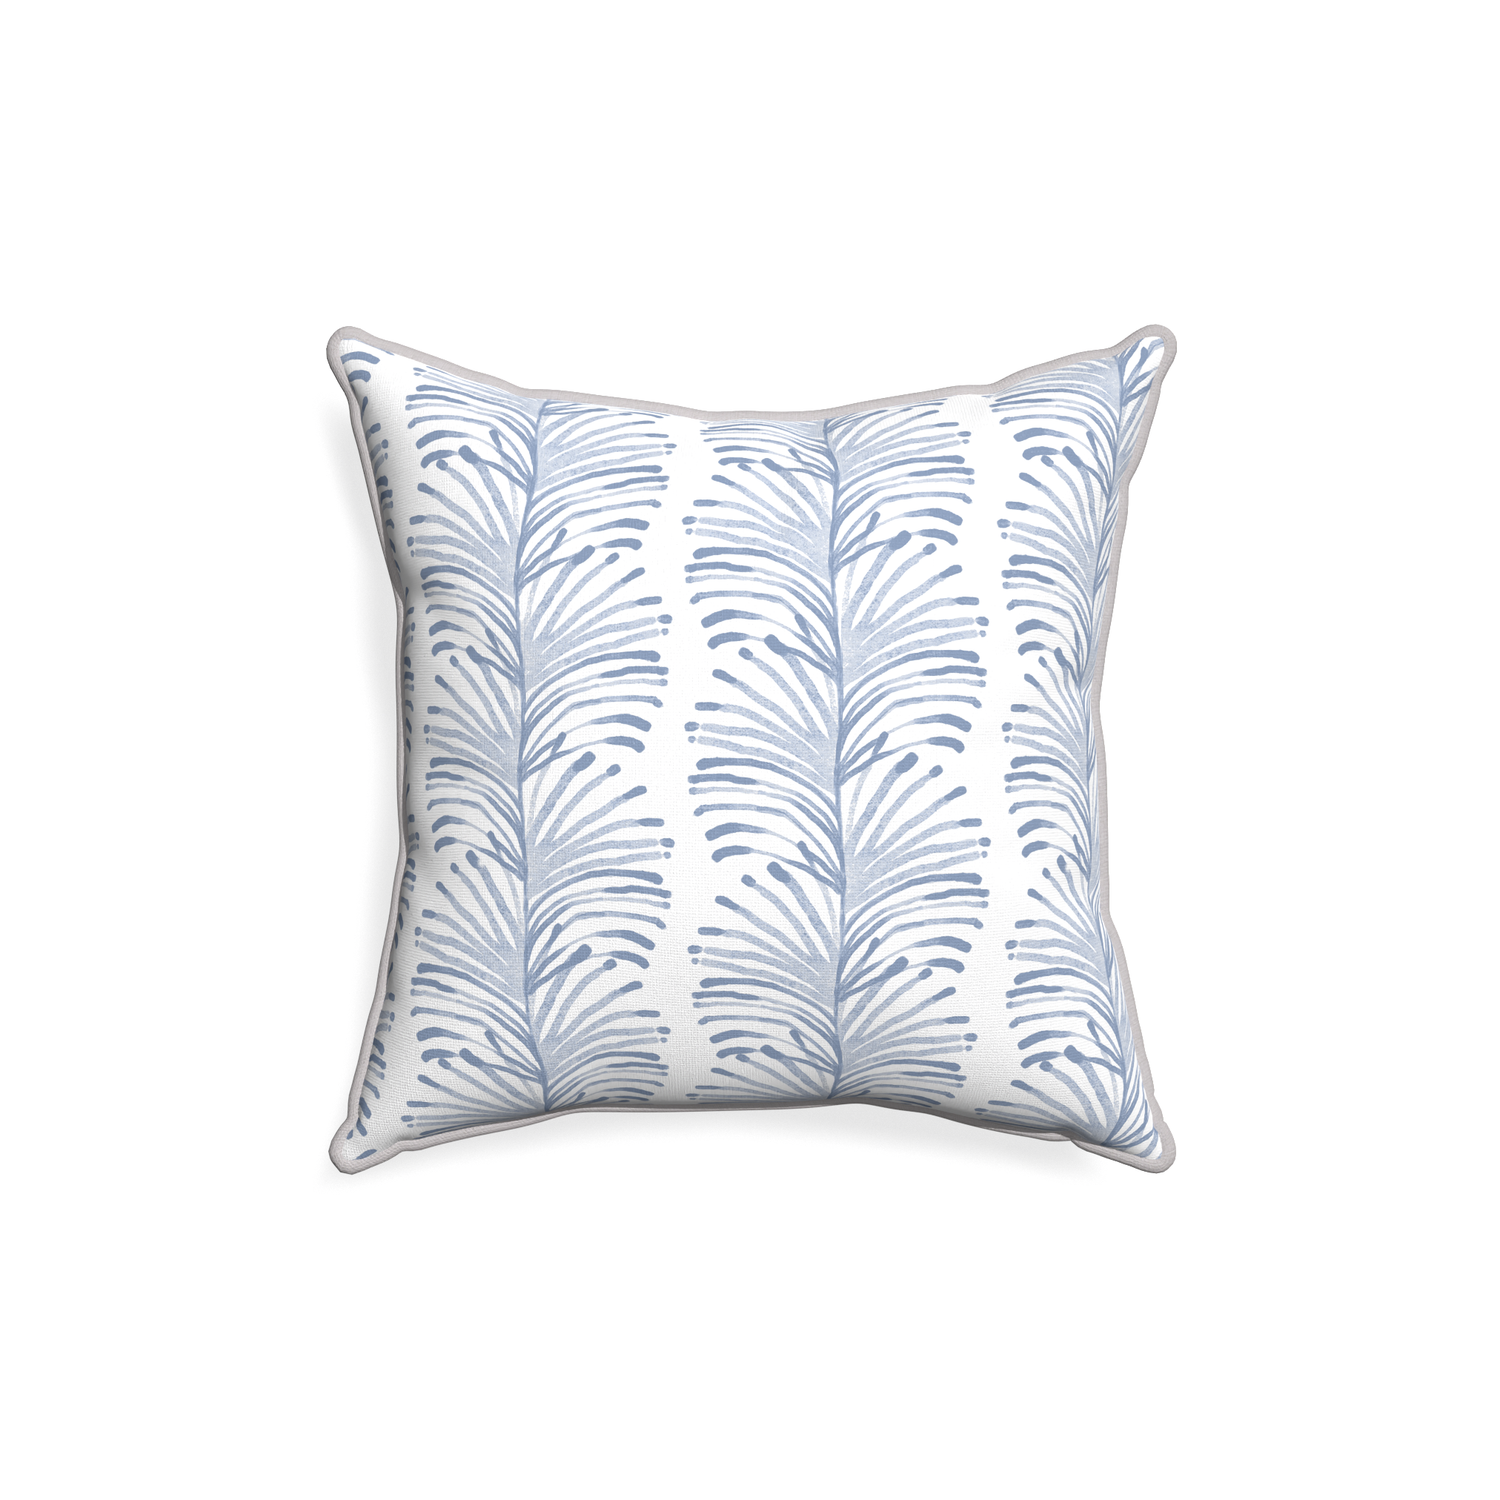 18-square emma sky custom sky blue botanical stripepillow with pebble piping on white background